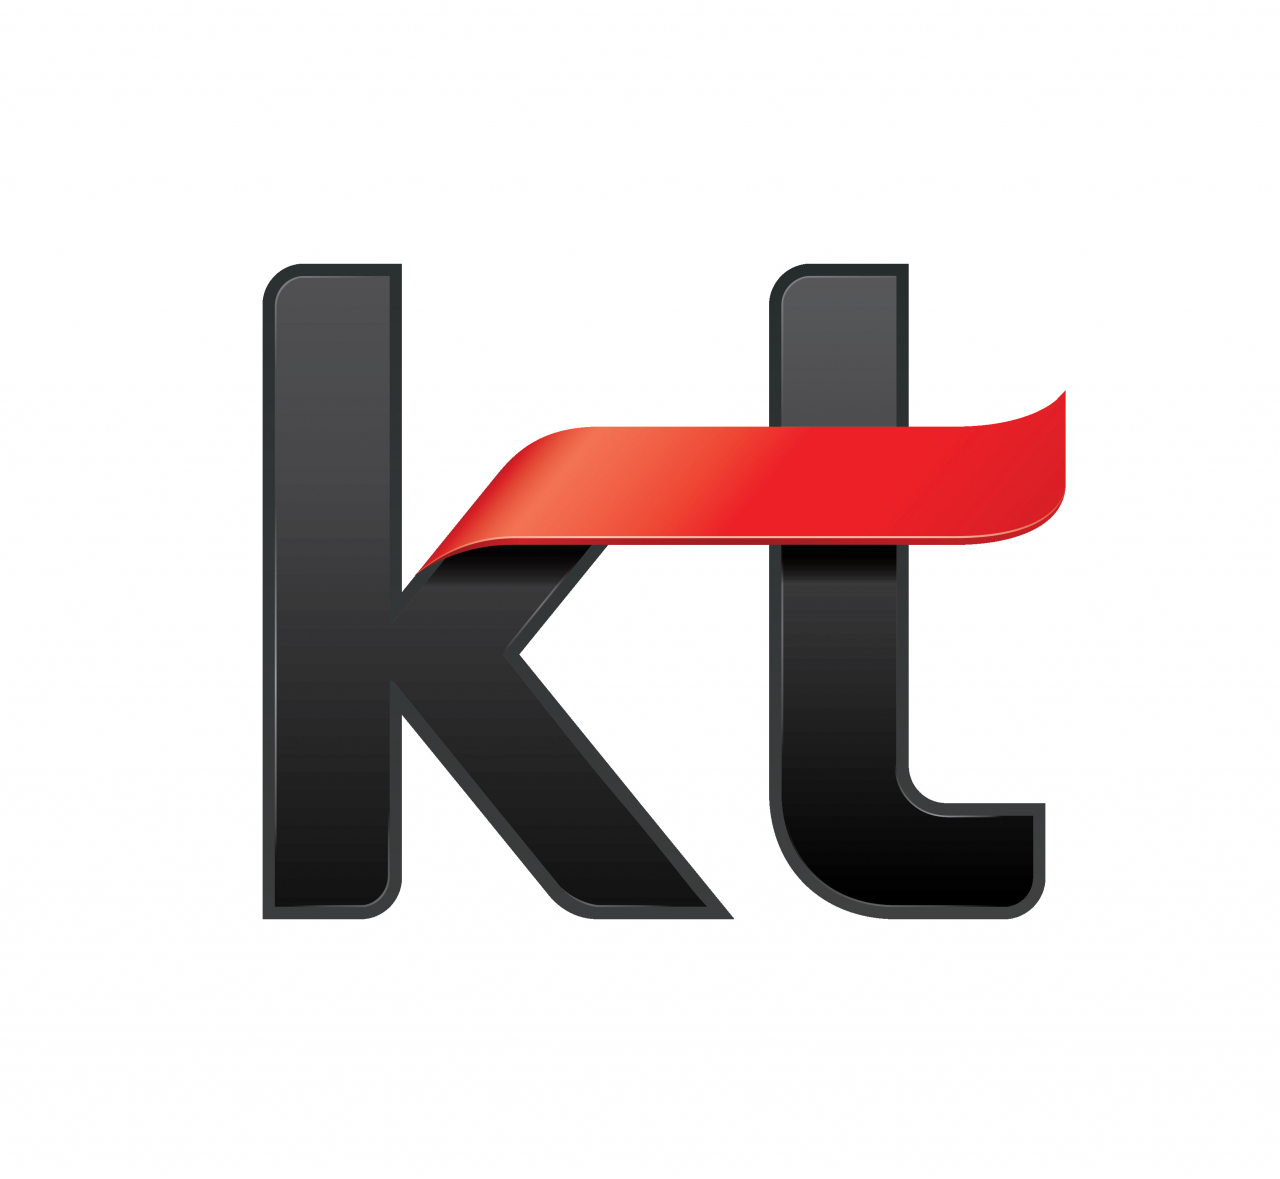 The corporate logo of KT. (KT)